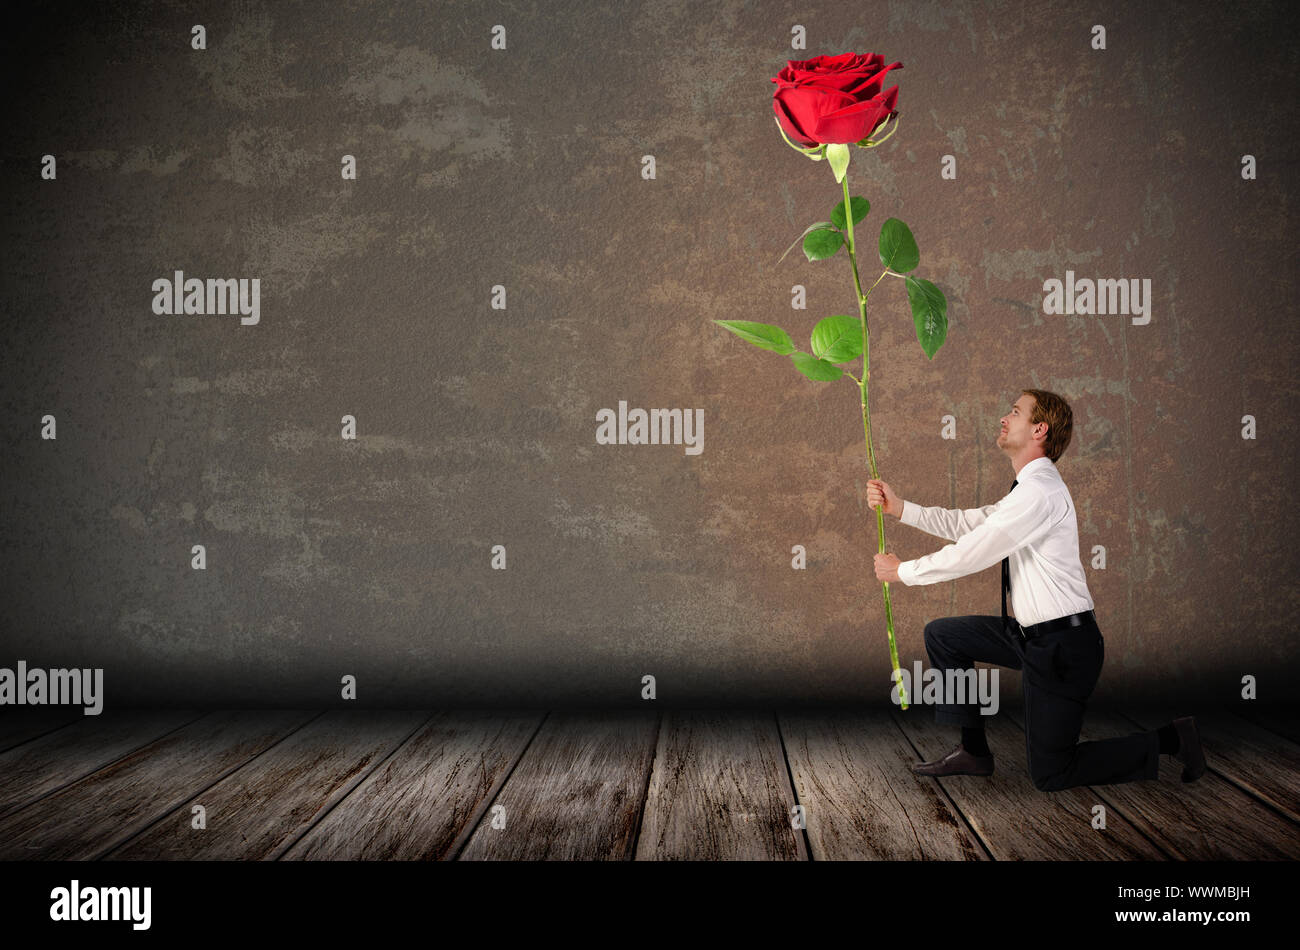 a kneeling man holding a big red rose Stock Photo